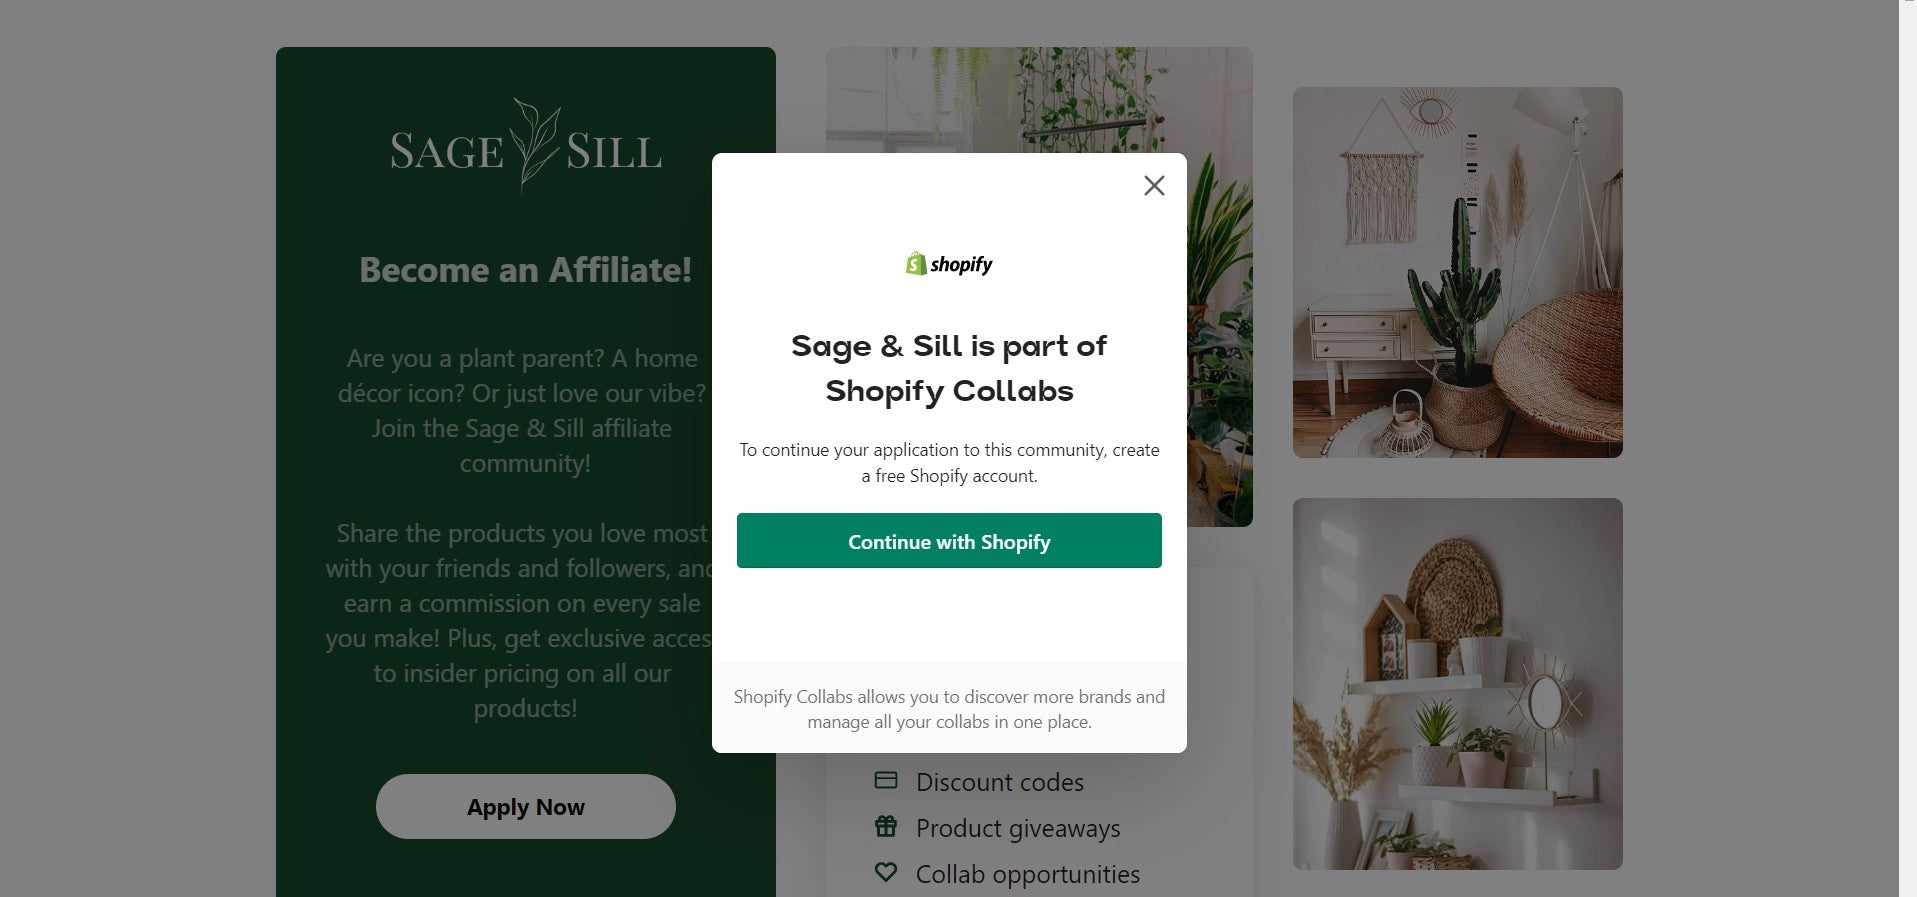 Sage & Sill's webpage for Shopify Collabs